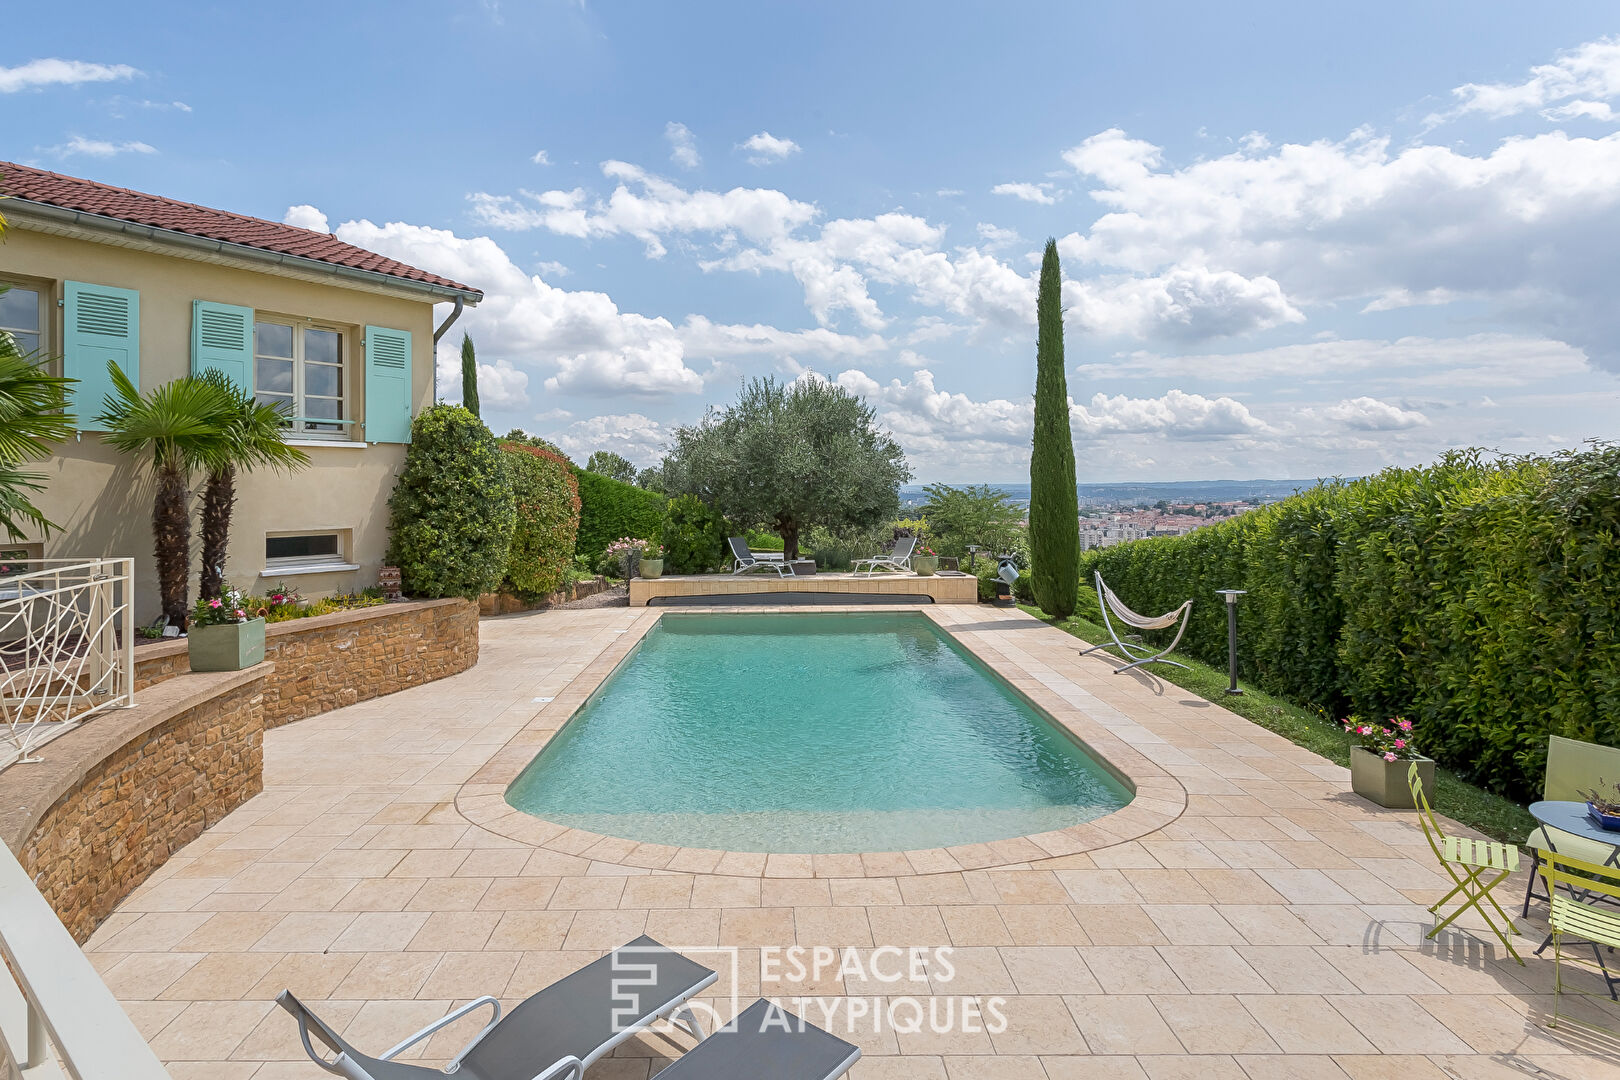 270m2 villa with swimming pool and breathtaking view